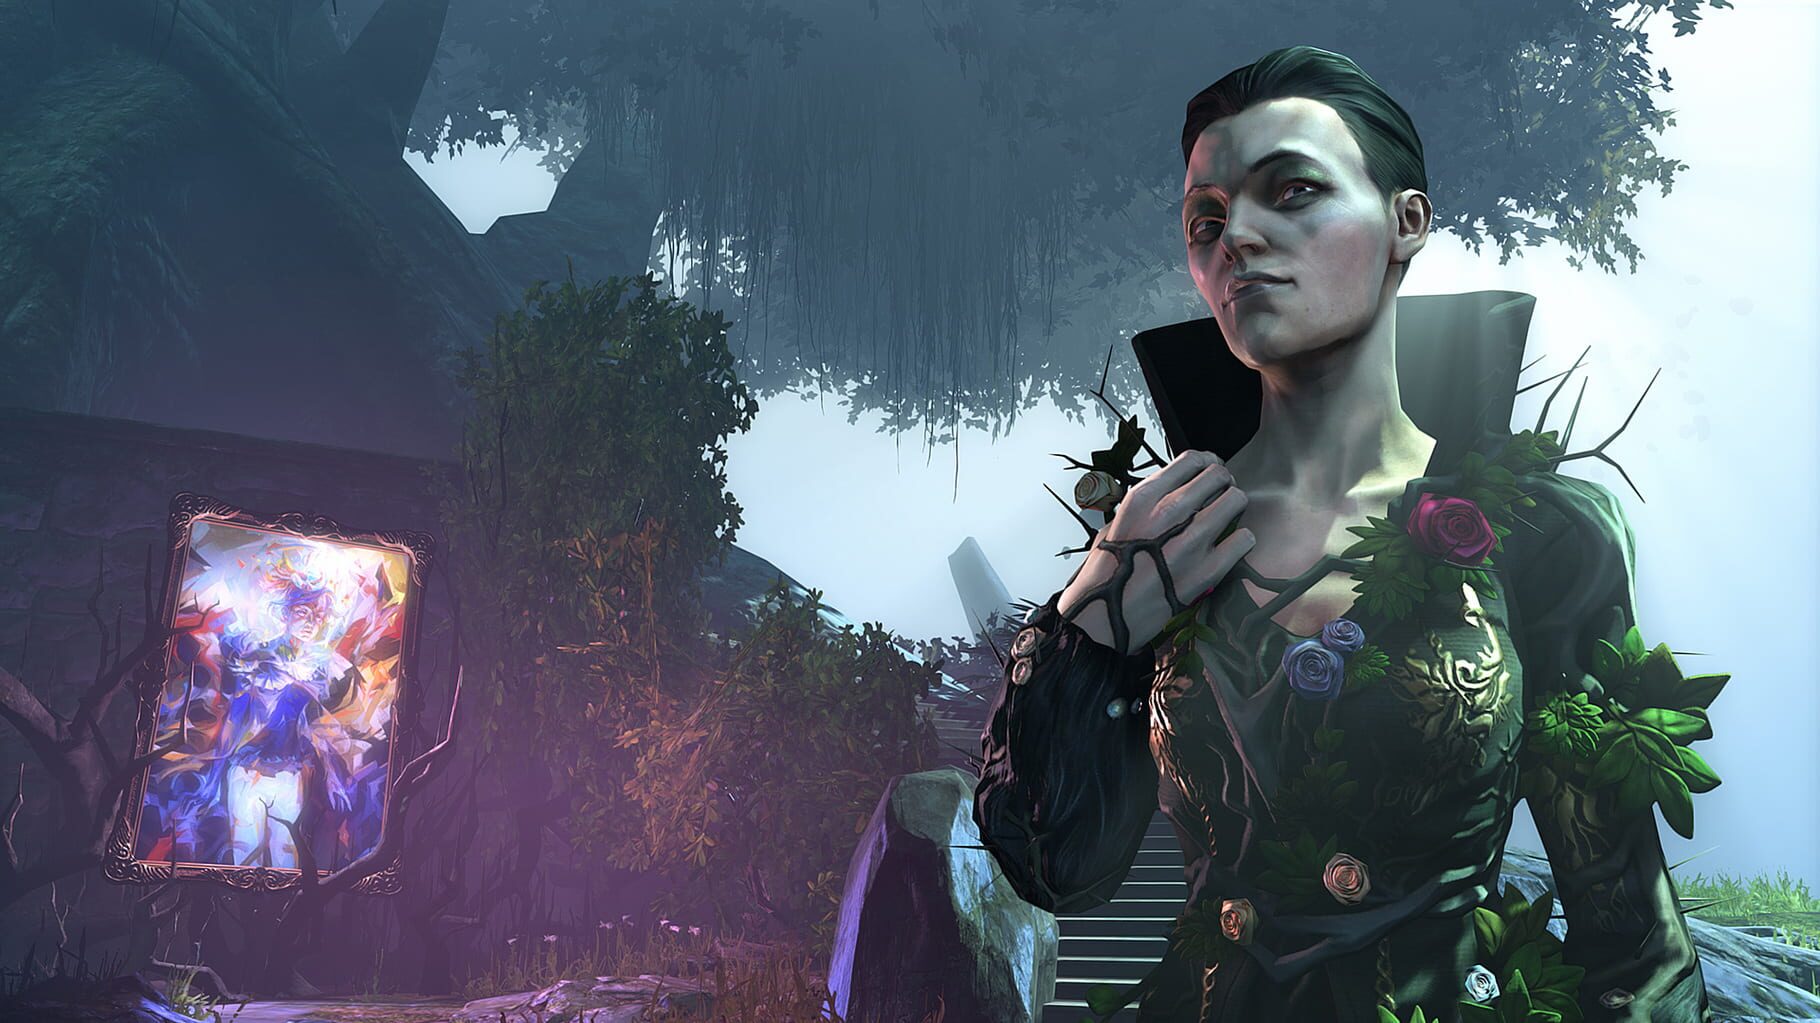 Dishonored: The Brigmore Witches Image